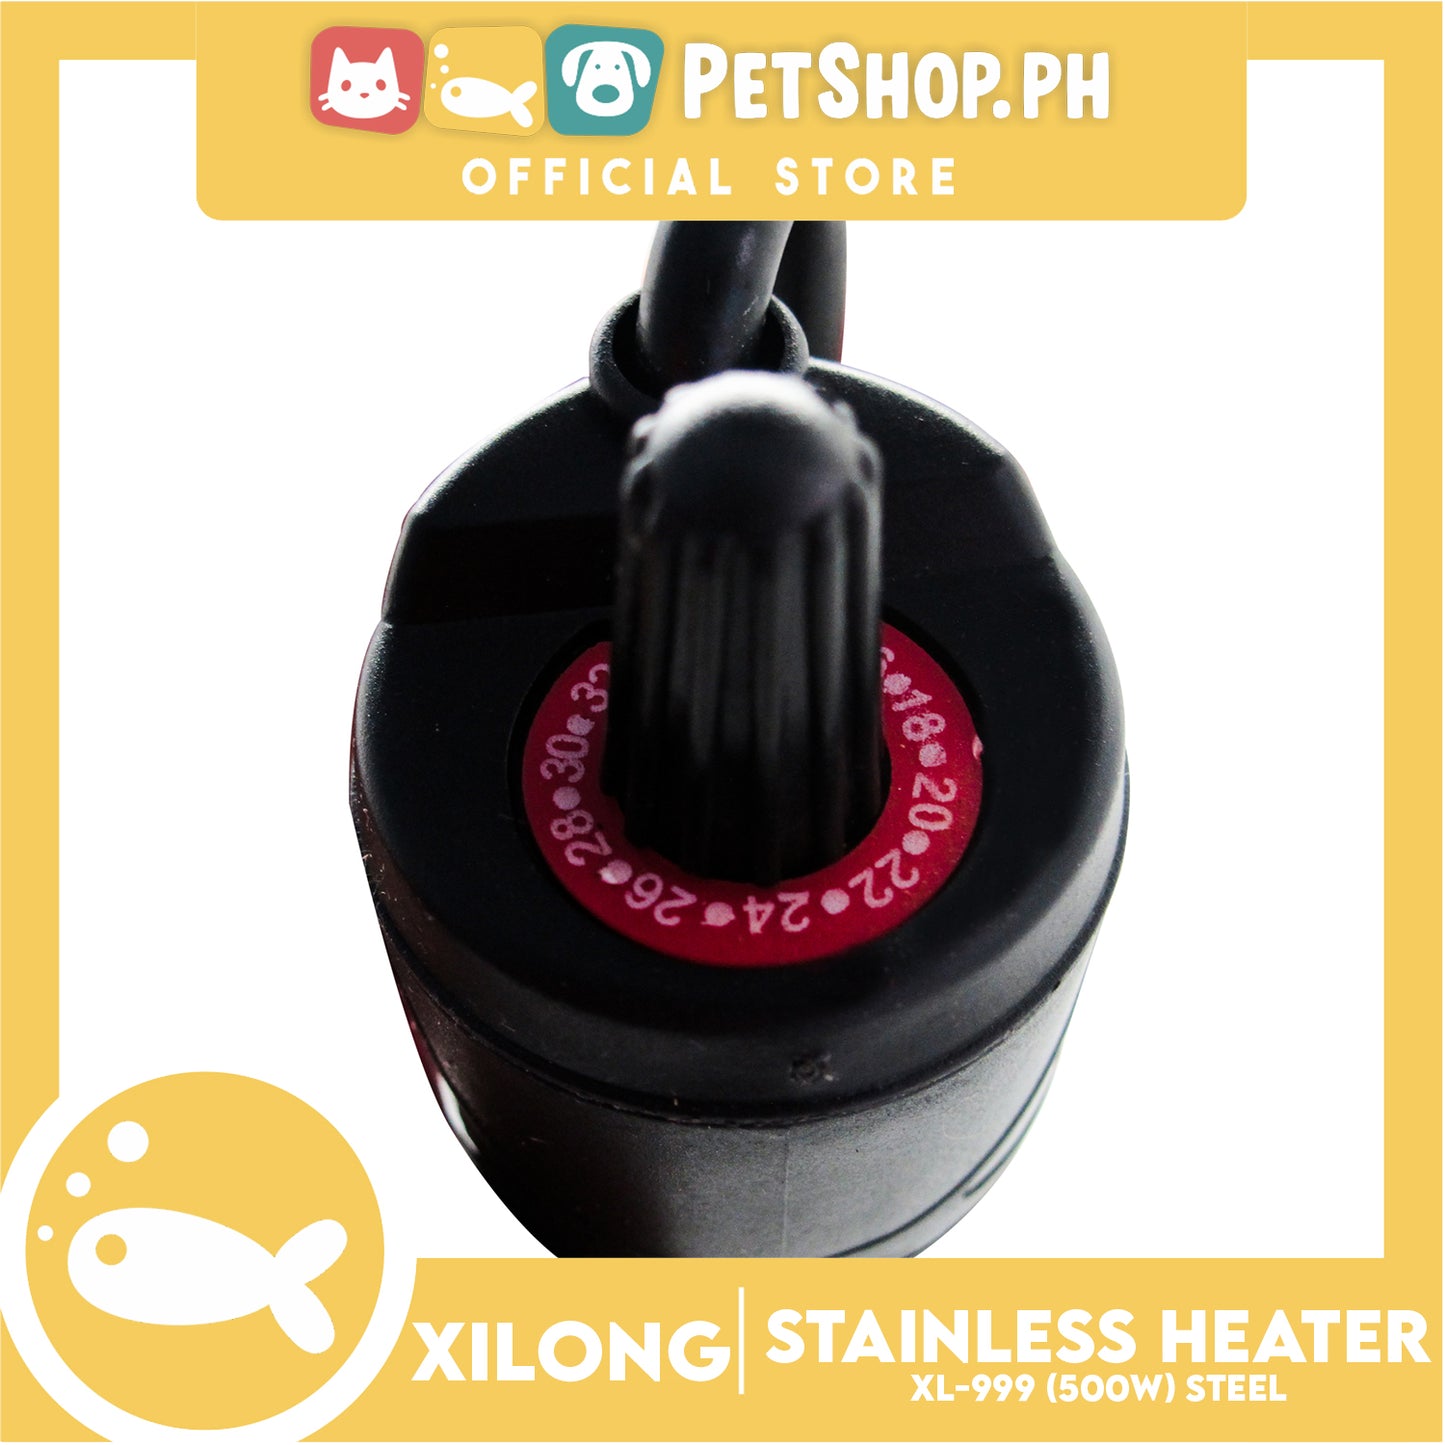 XL-999 Stainless Heater 500w